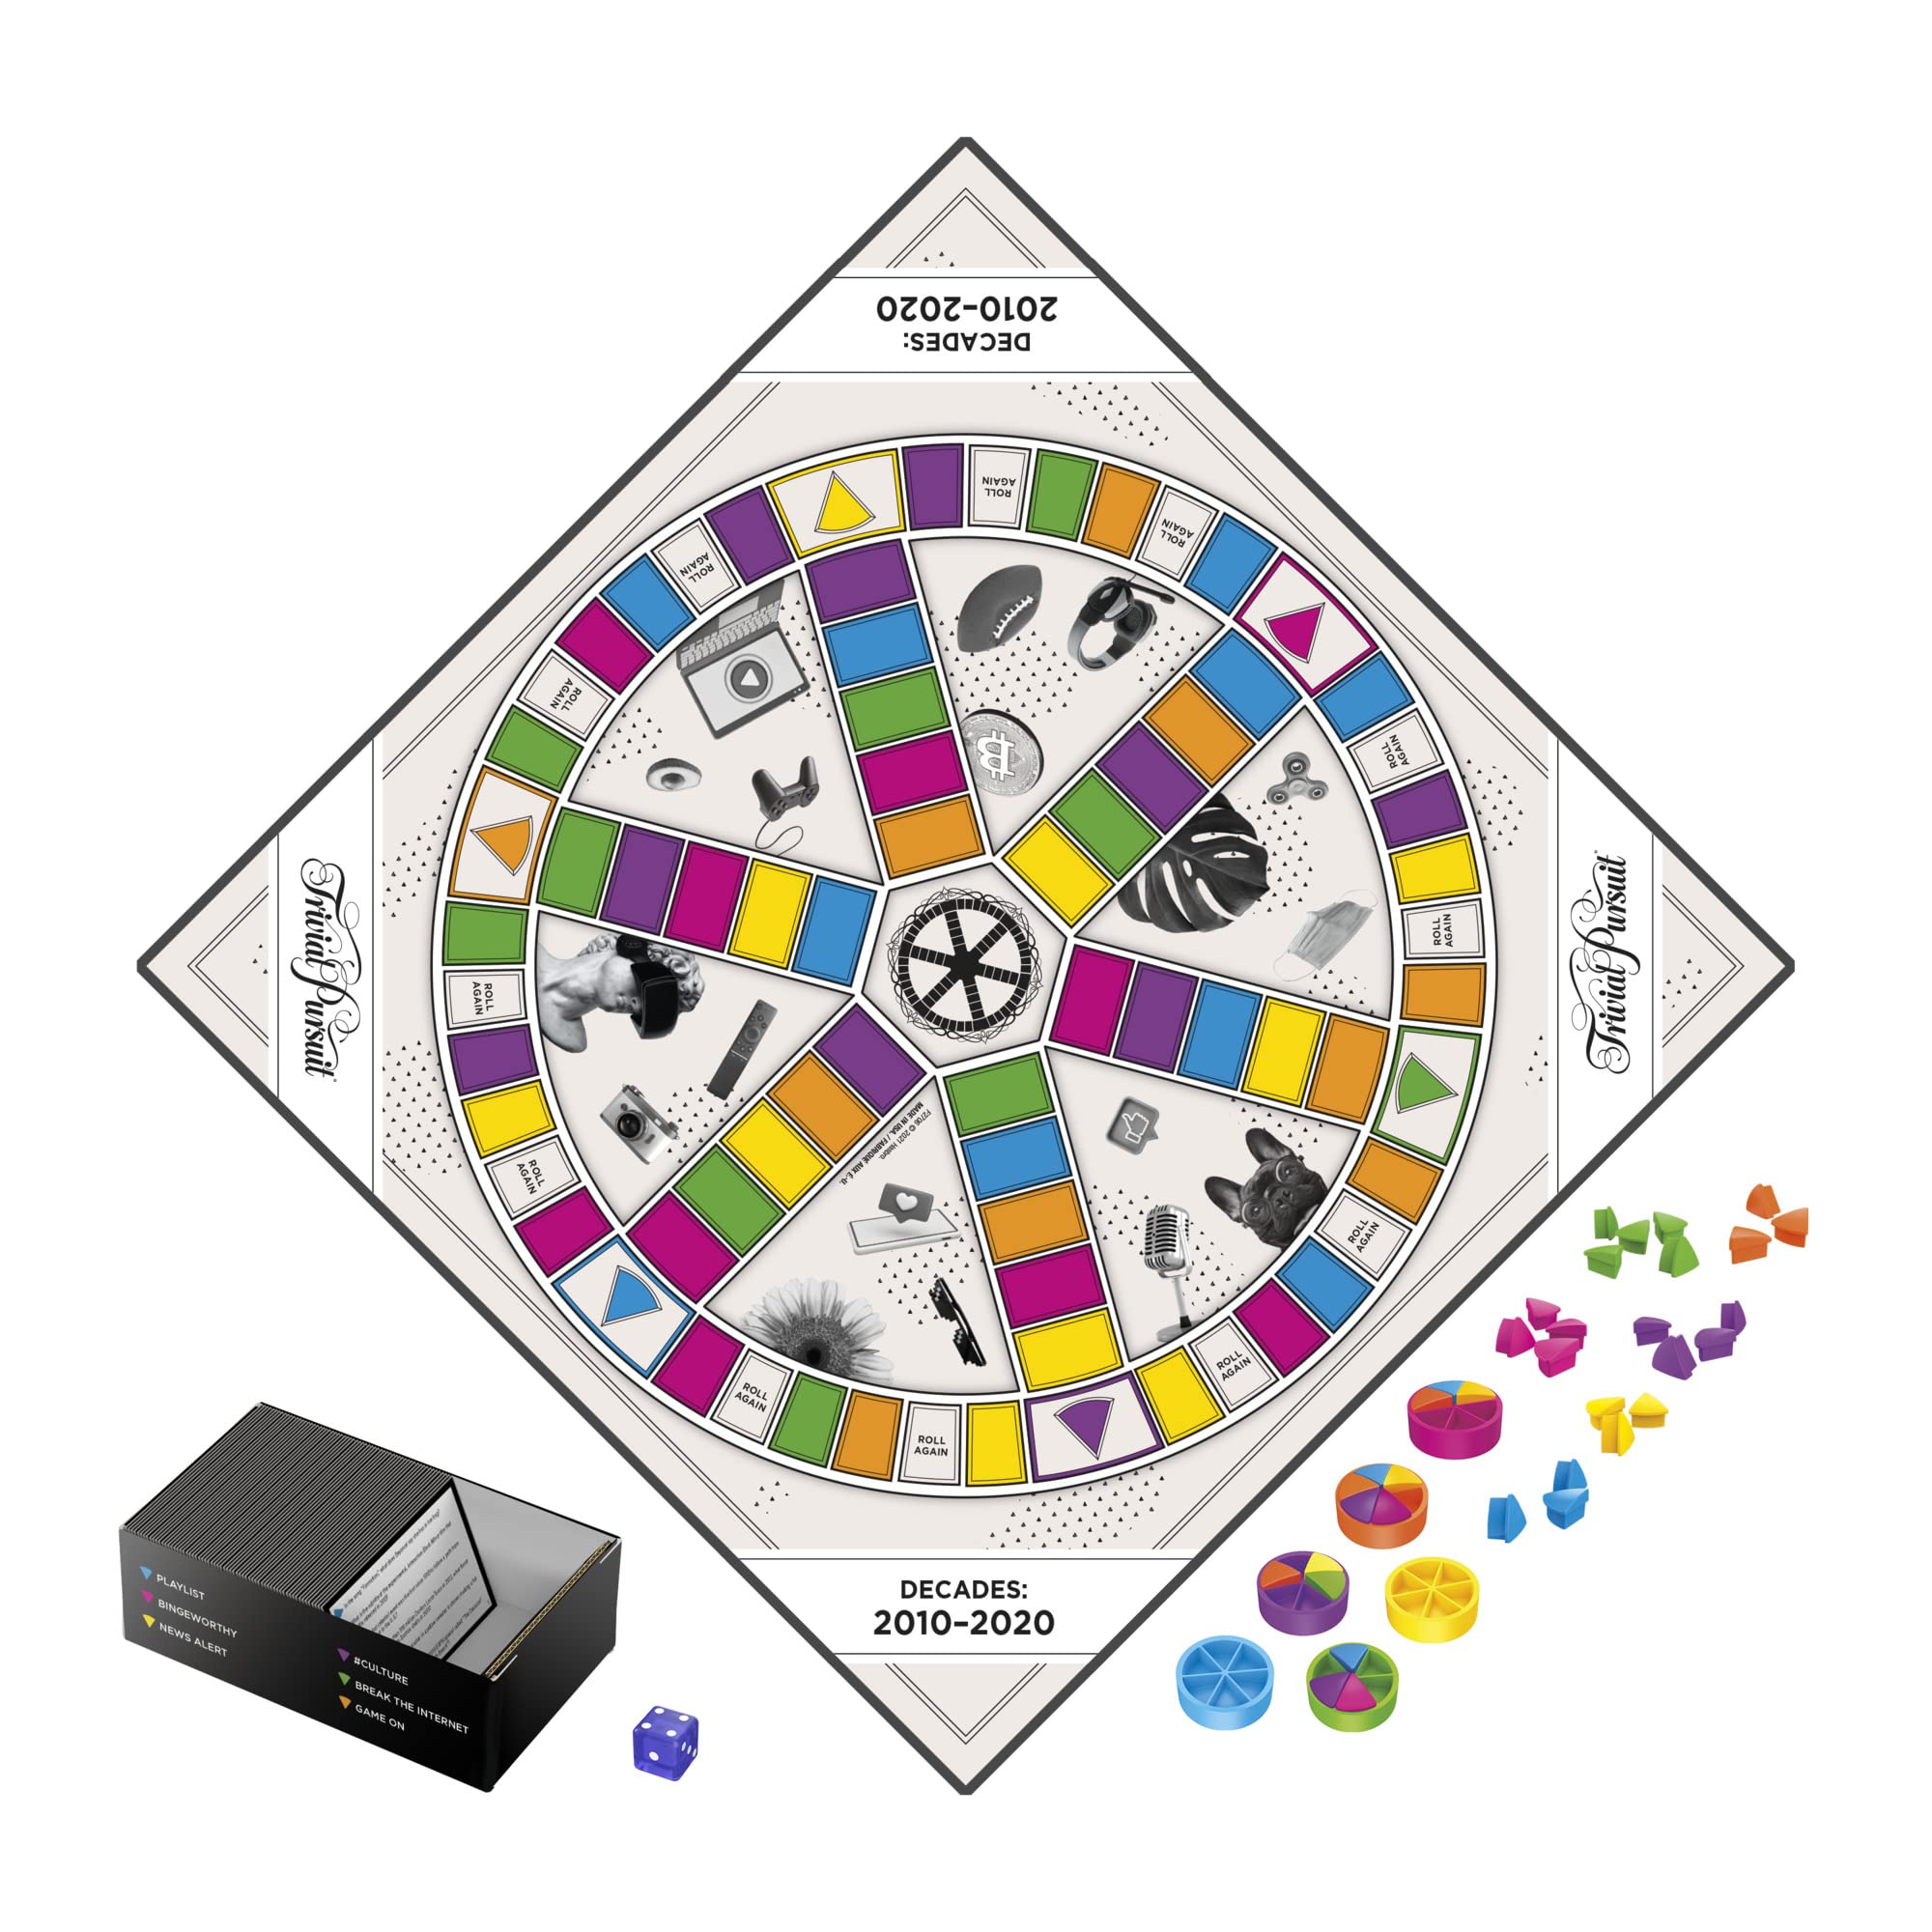 Trivial Pursuit Decades 2010 to 2020 Board Game for Adults and Teens, Pop Culture Trivia Game for 2 to 6 Players, Ages 16 and Up